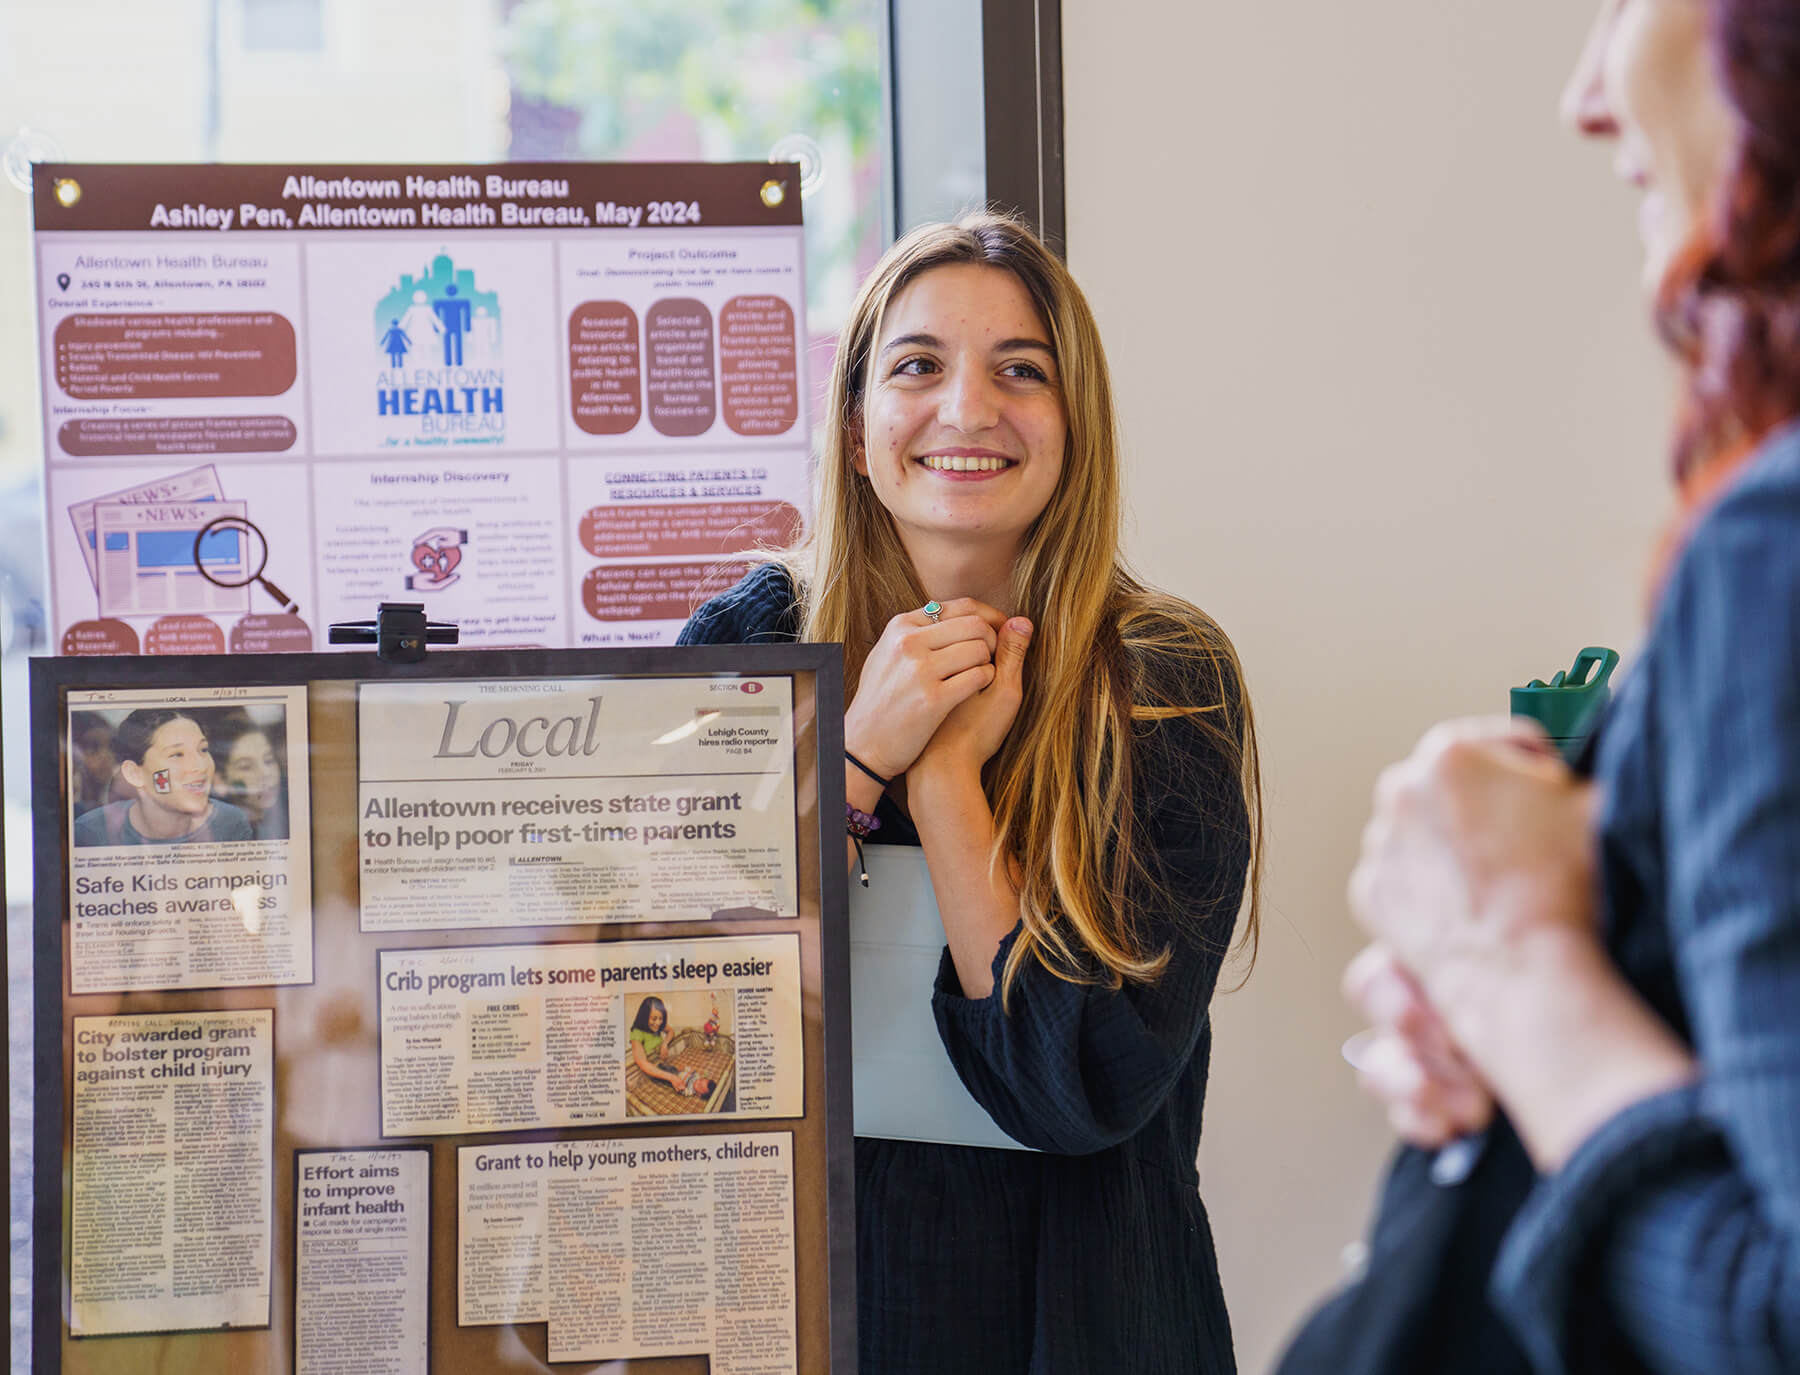 Student stands beside her presentations at the College of Health symposium with hands clasped and smiling as she presents